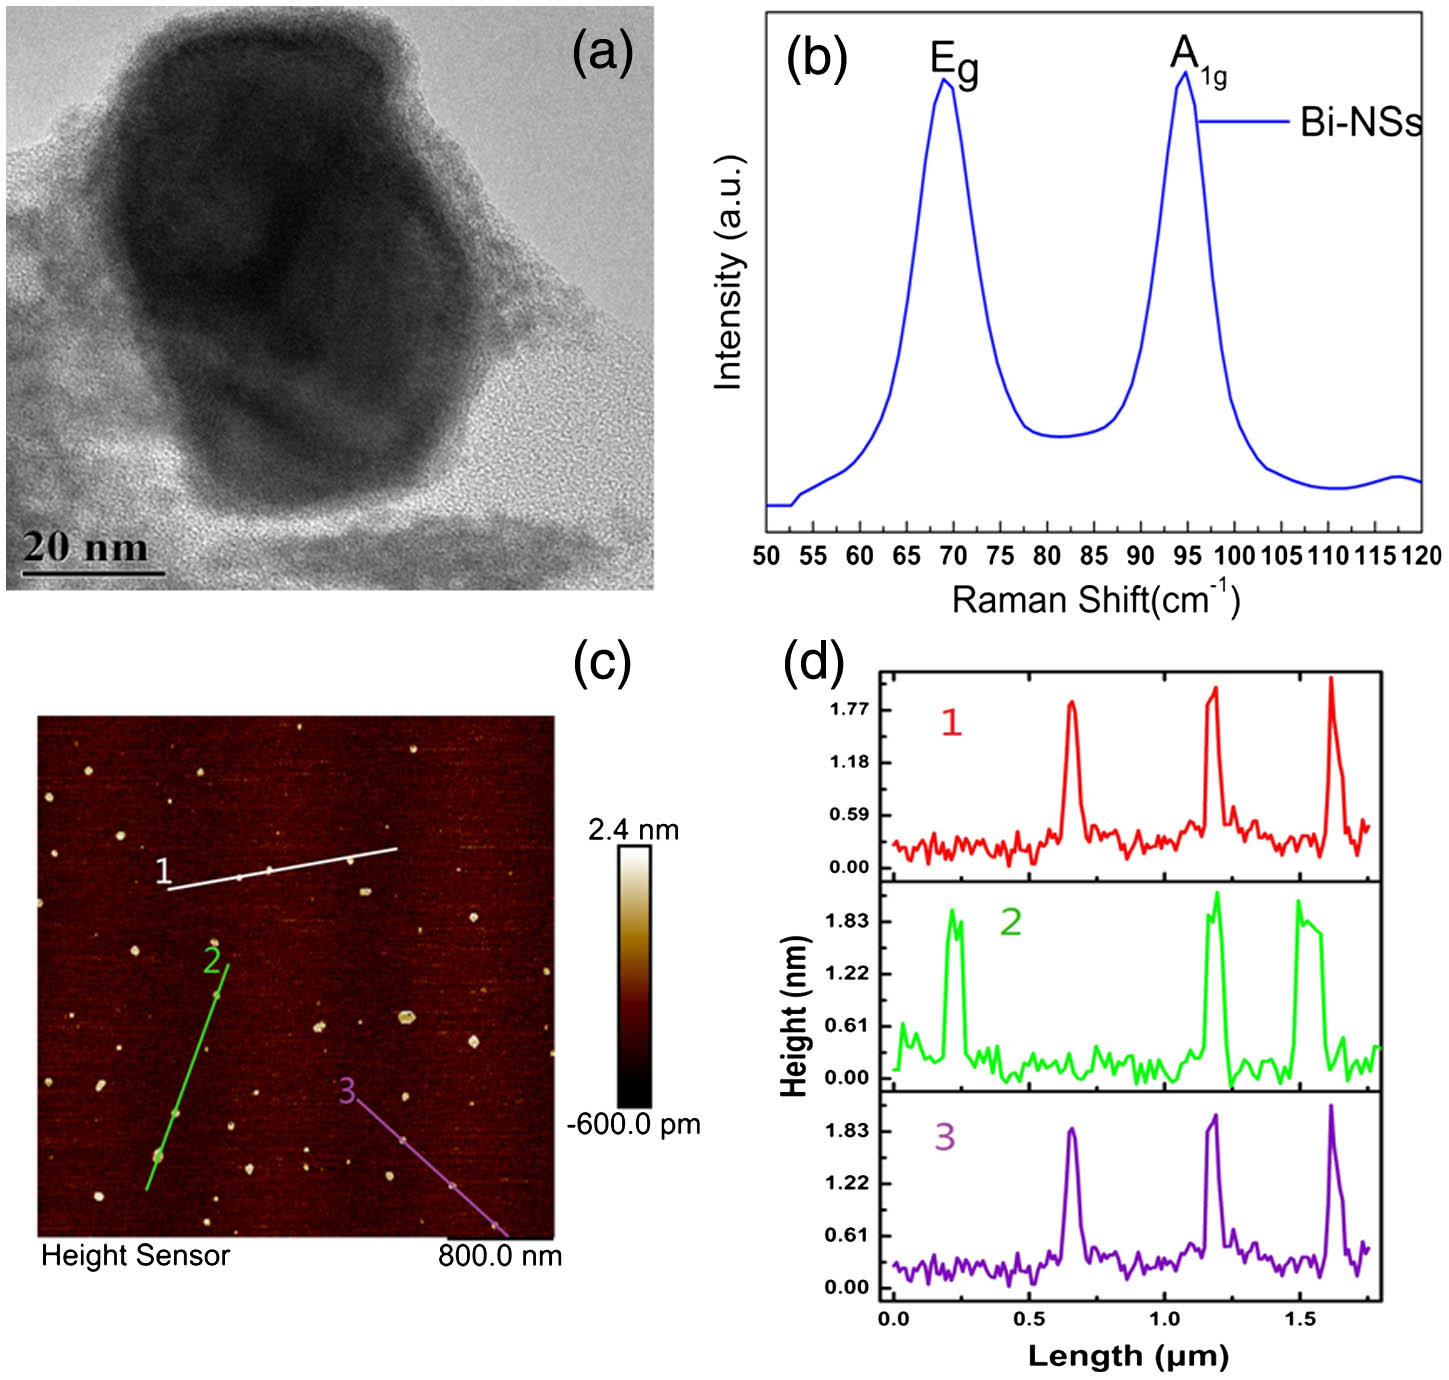 (a) HRTEM image, (b) Raman spectrum, (c) AFM image of the bismuth nanosheets, and (d) typical height profiles.